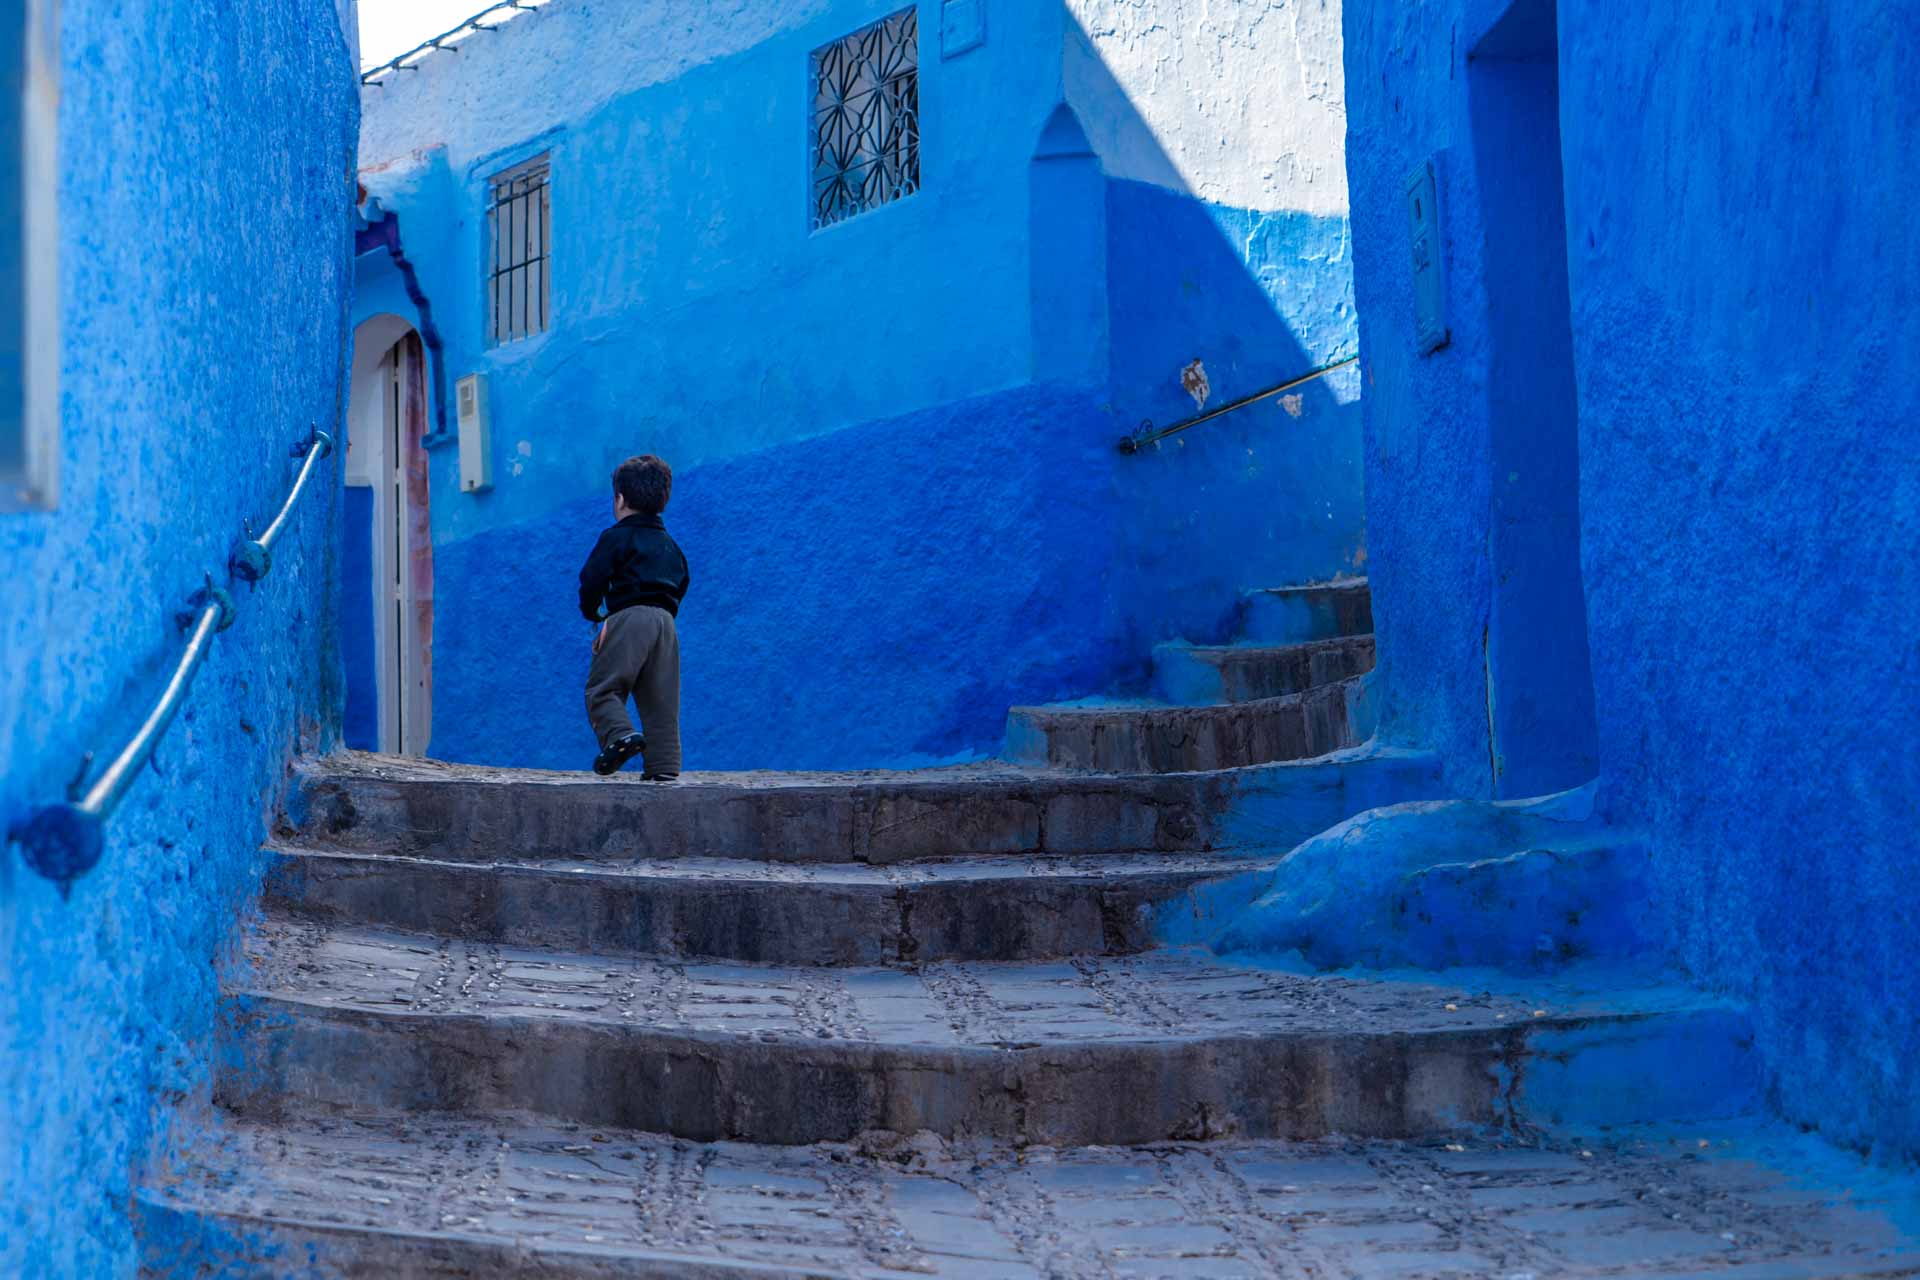 Morocco Chefchaouen - Running from Steve McCurry, morocco, chefchaouen, , pescart, photo blog, travel blog, blog, photo travel blog, enrico pescantini, pescantini